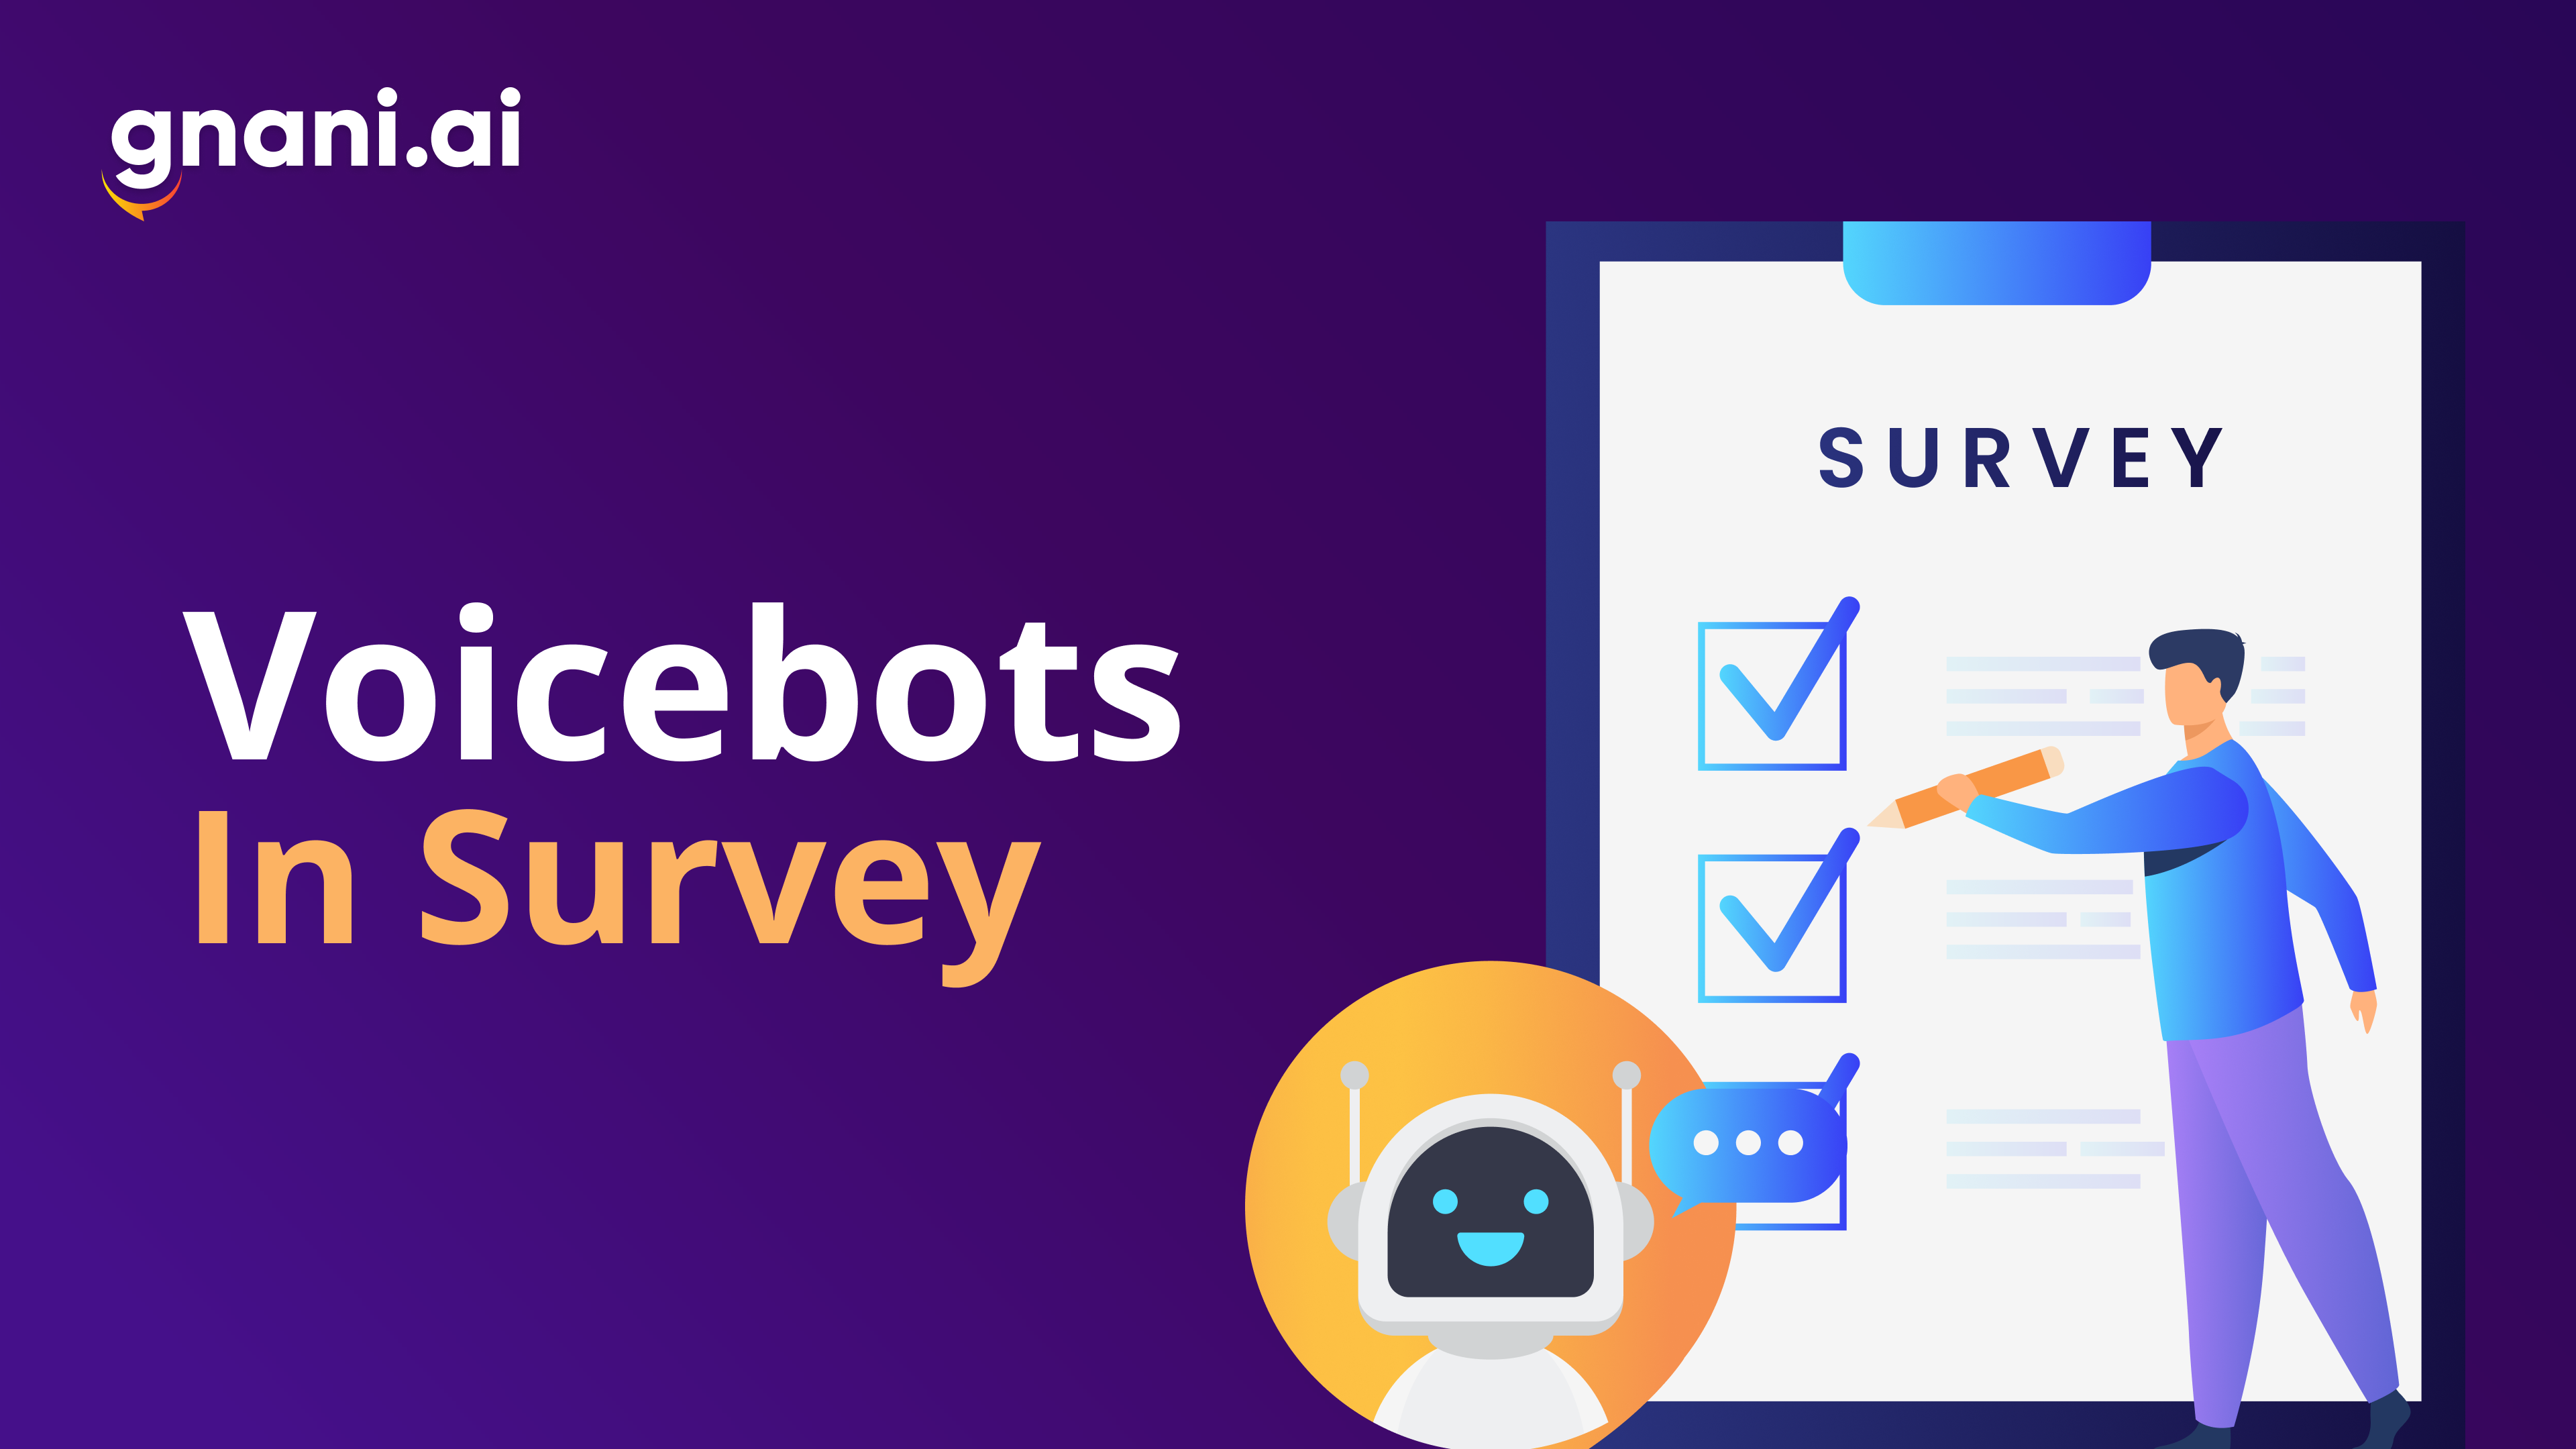 voicebots in survey featured image